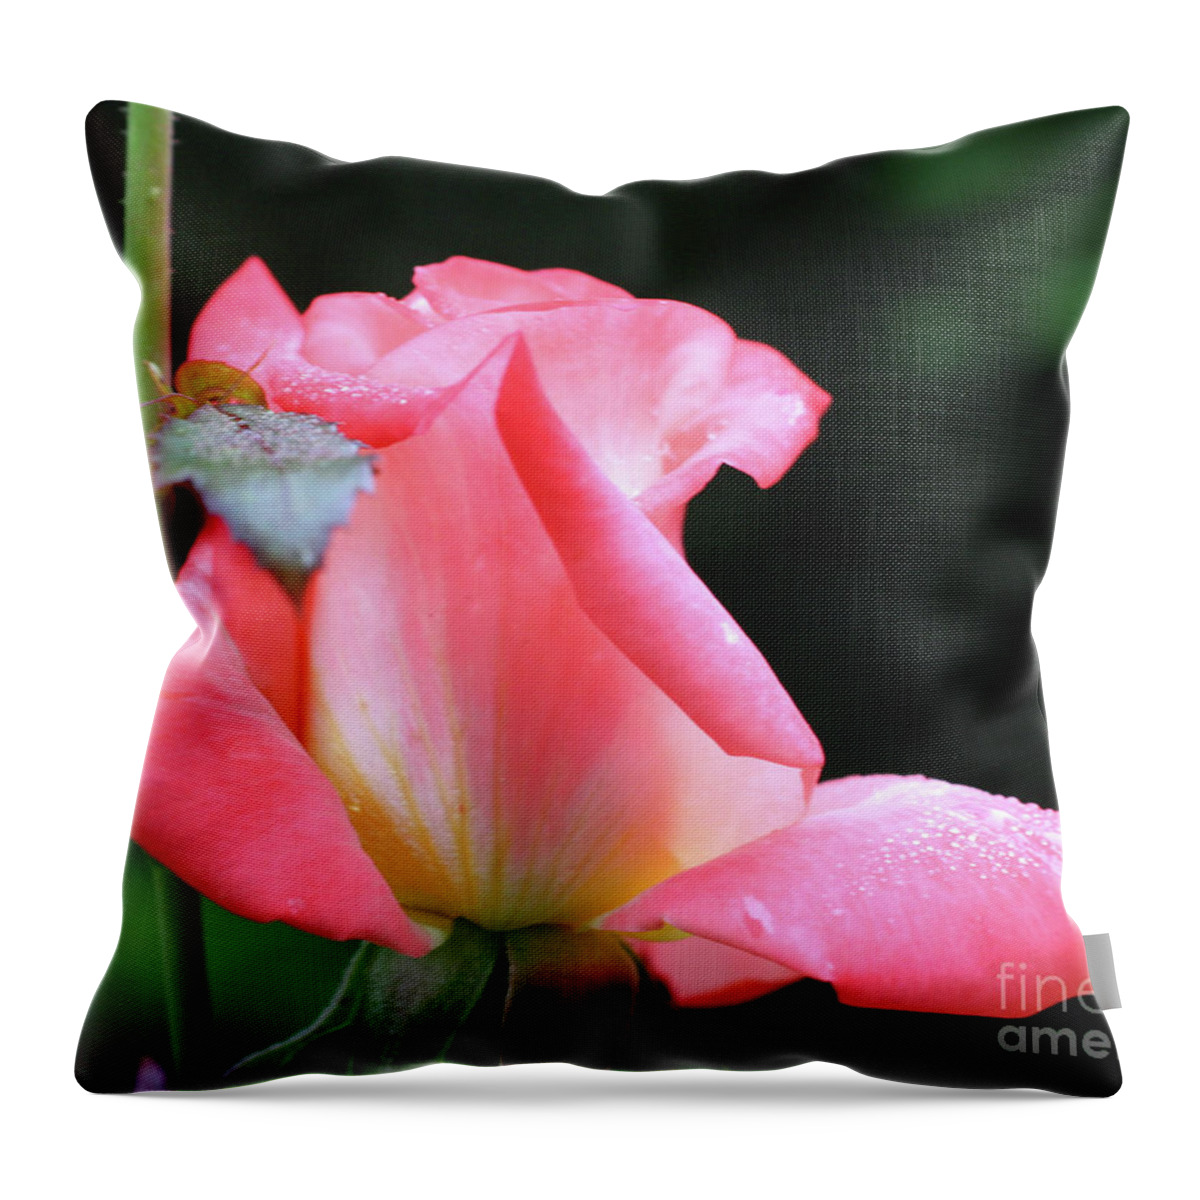 Flower Throw Pillow featuring the photograph Rosebud Delight by Smilin Eyes Treasures